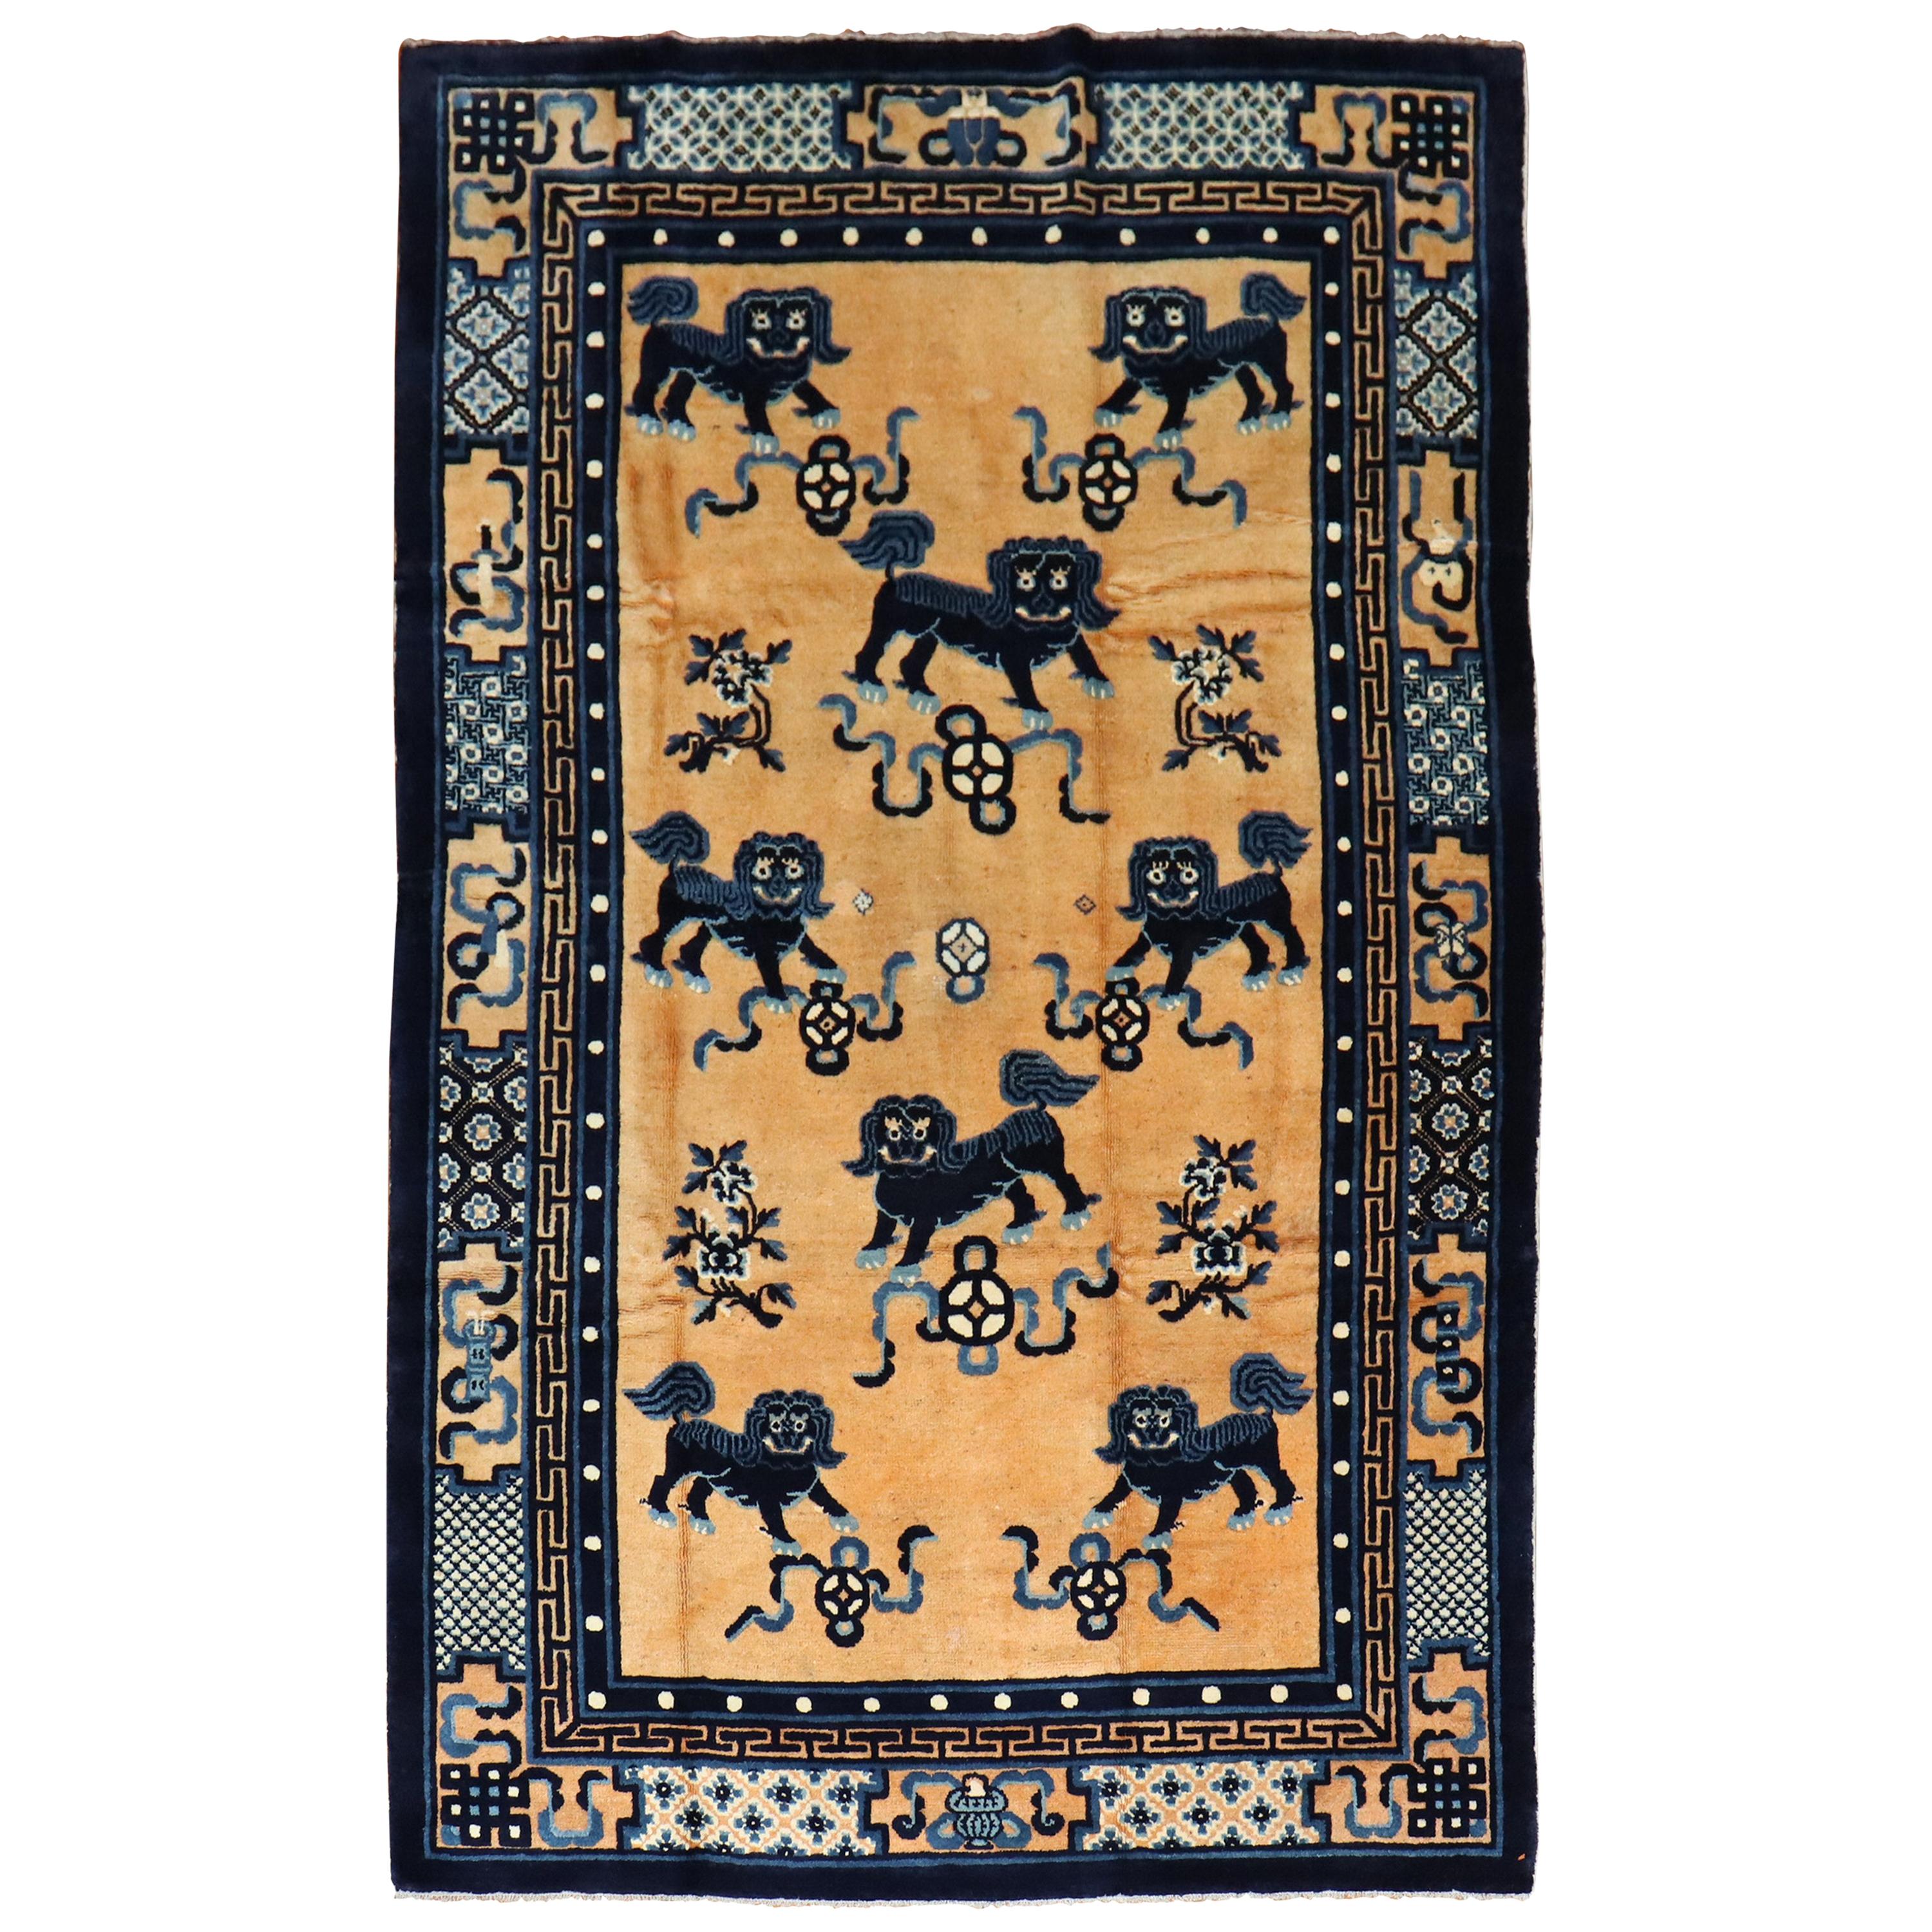 Foo Dog Pictorial Chinese 20th Century Wool Rug